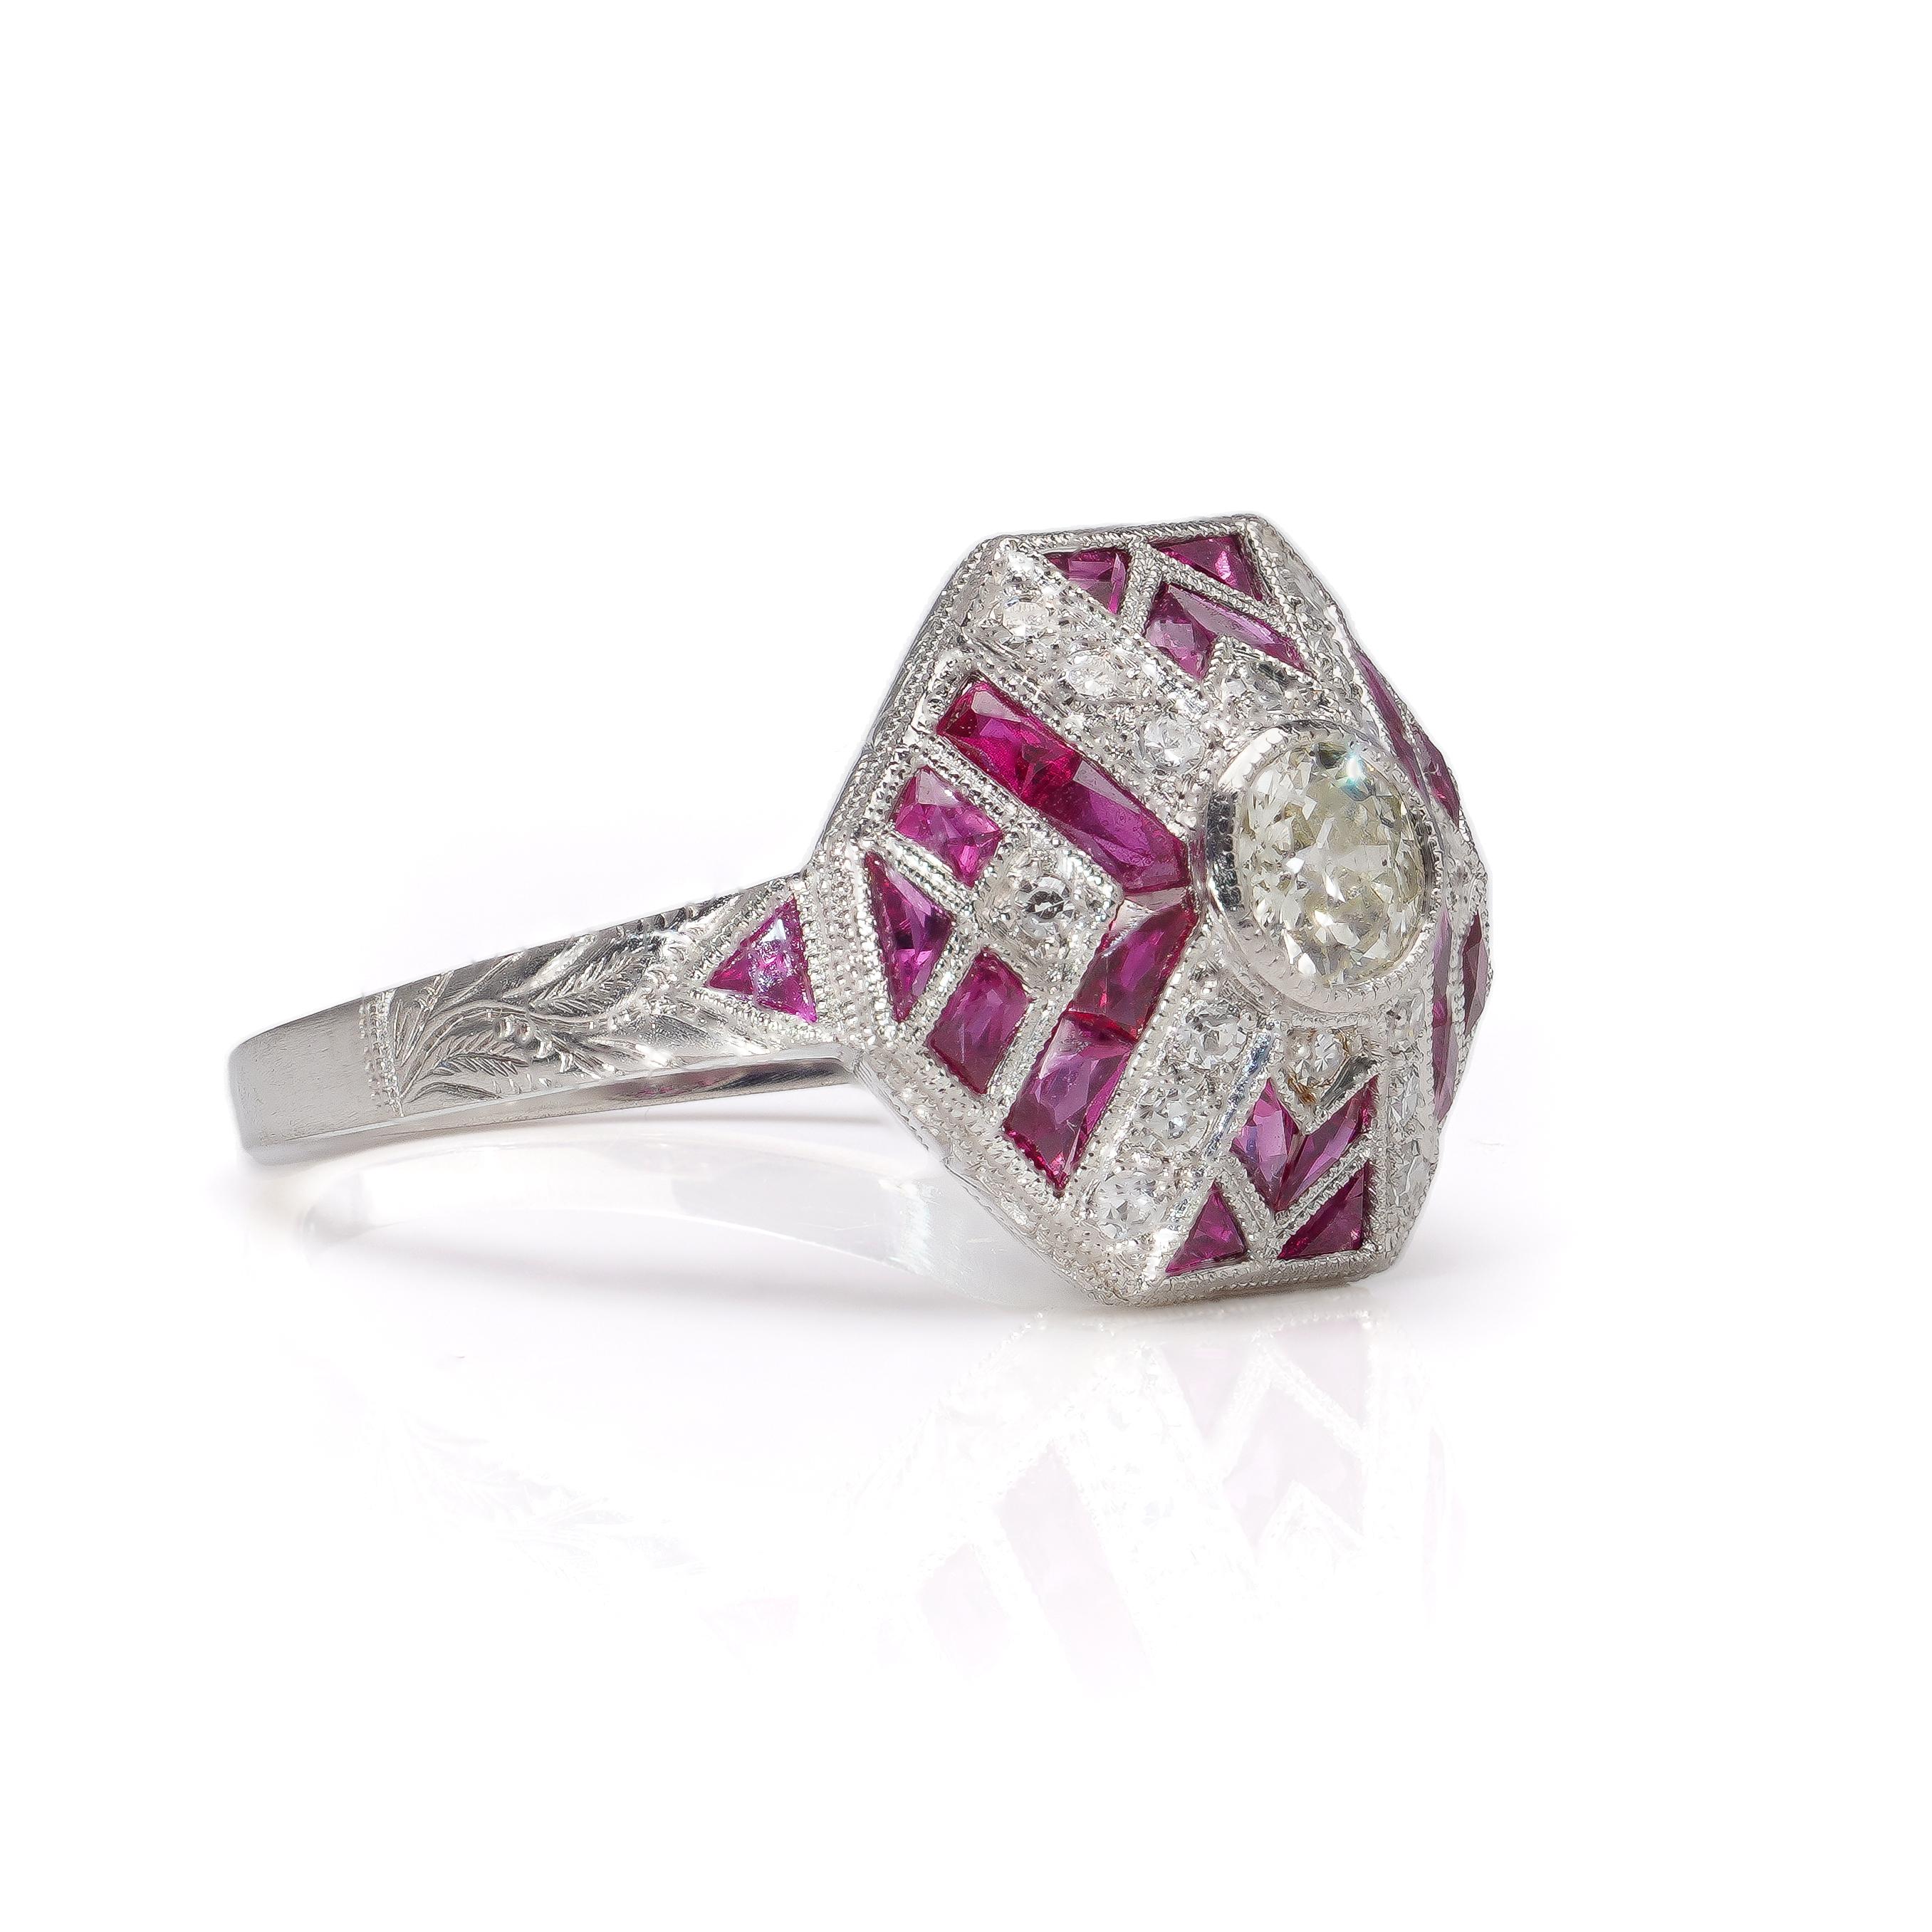 Platinum Art Deco-Inspired Diamond and Ruby Ring For Sale 1